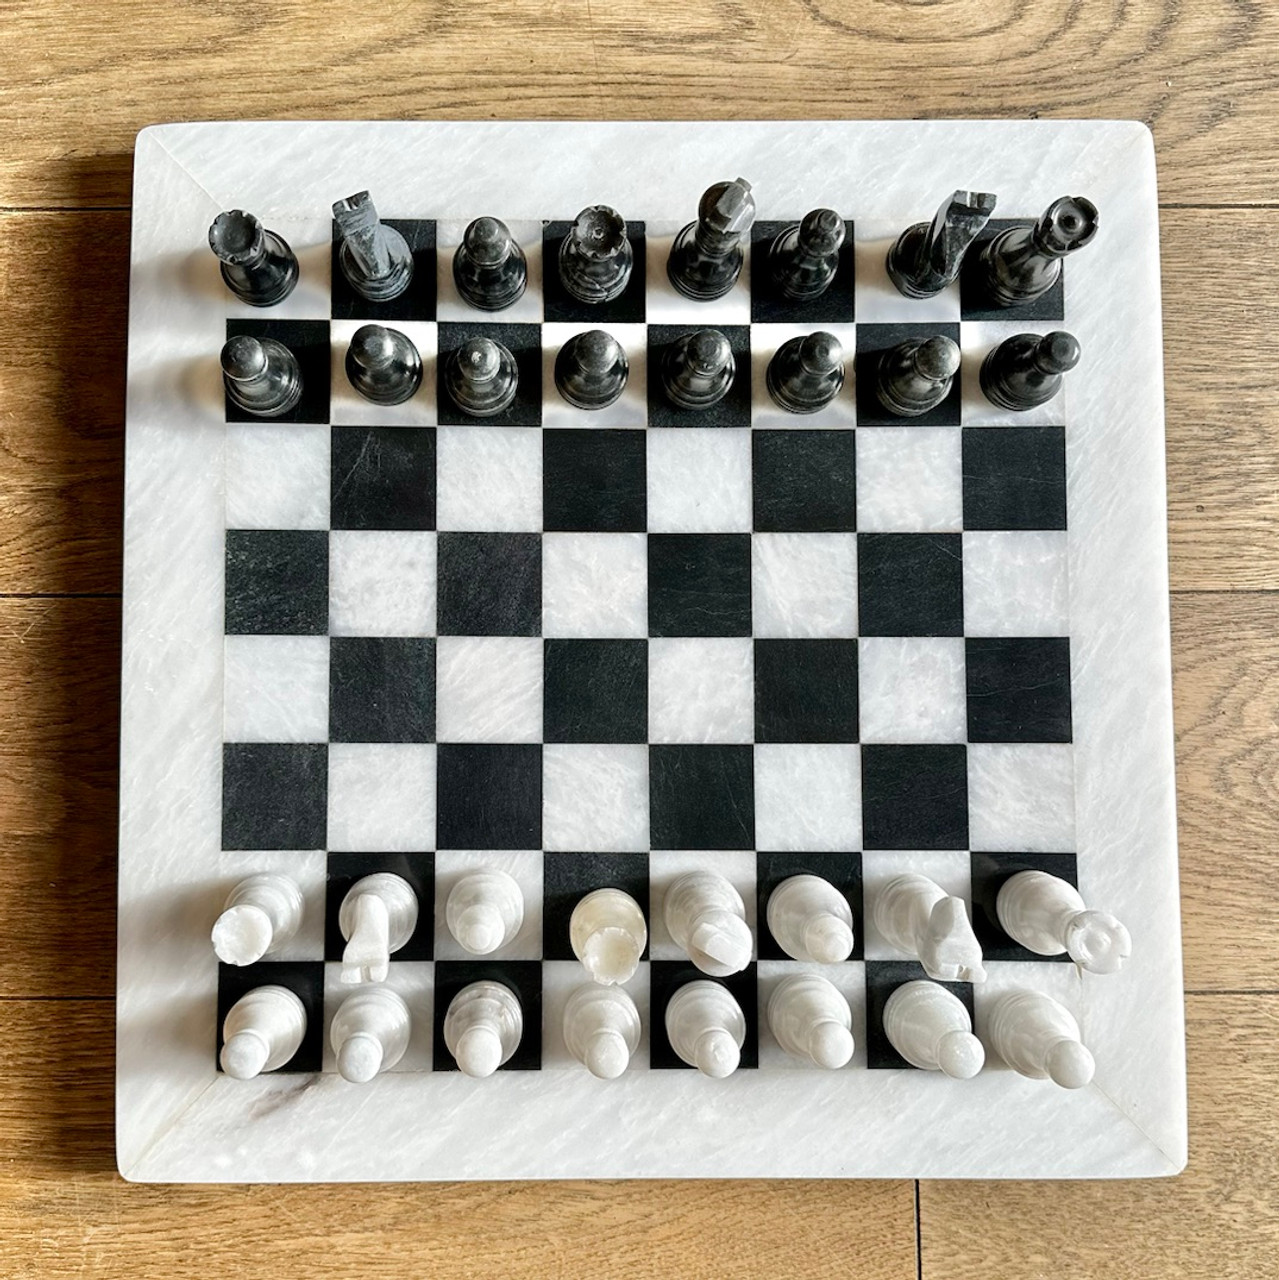  The Queen's Gambit White Marble 15 Inch Chess Board Inlaid  with Carnelian Blocks & Chess Coins, Chess Piece Names, Chess Unblocked :  Home & Kitchen